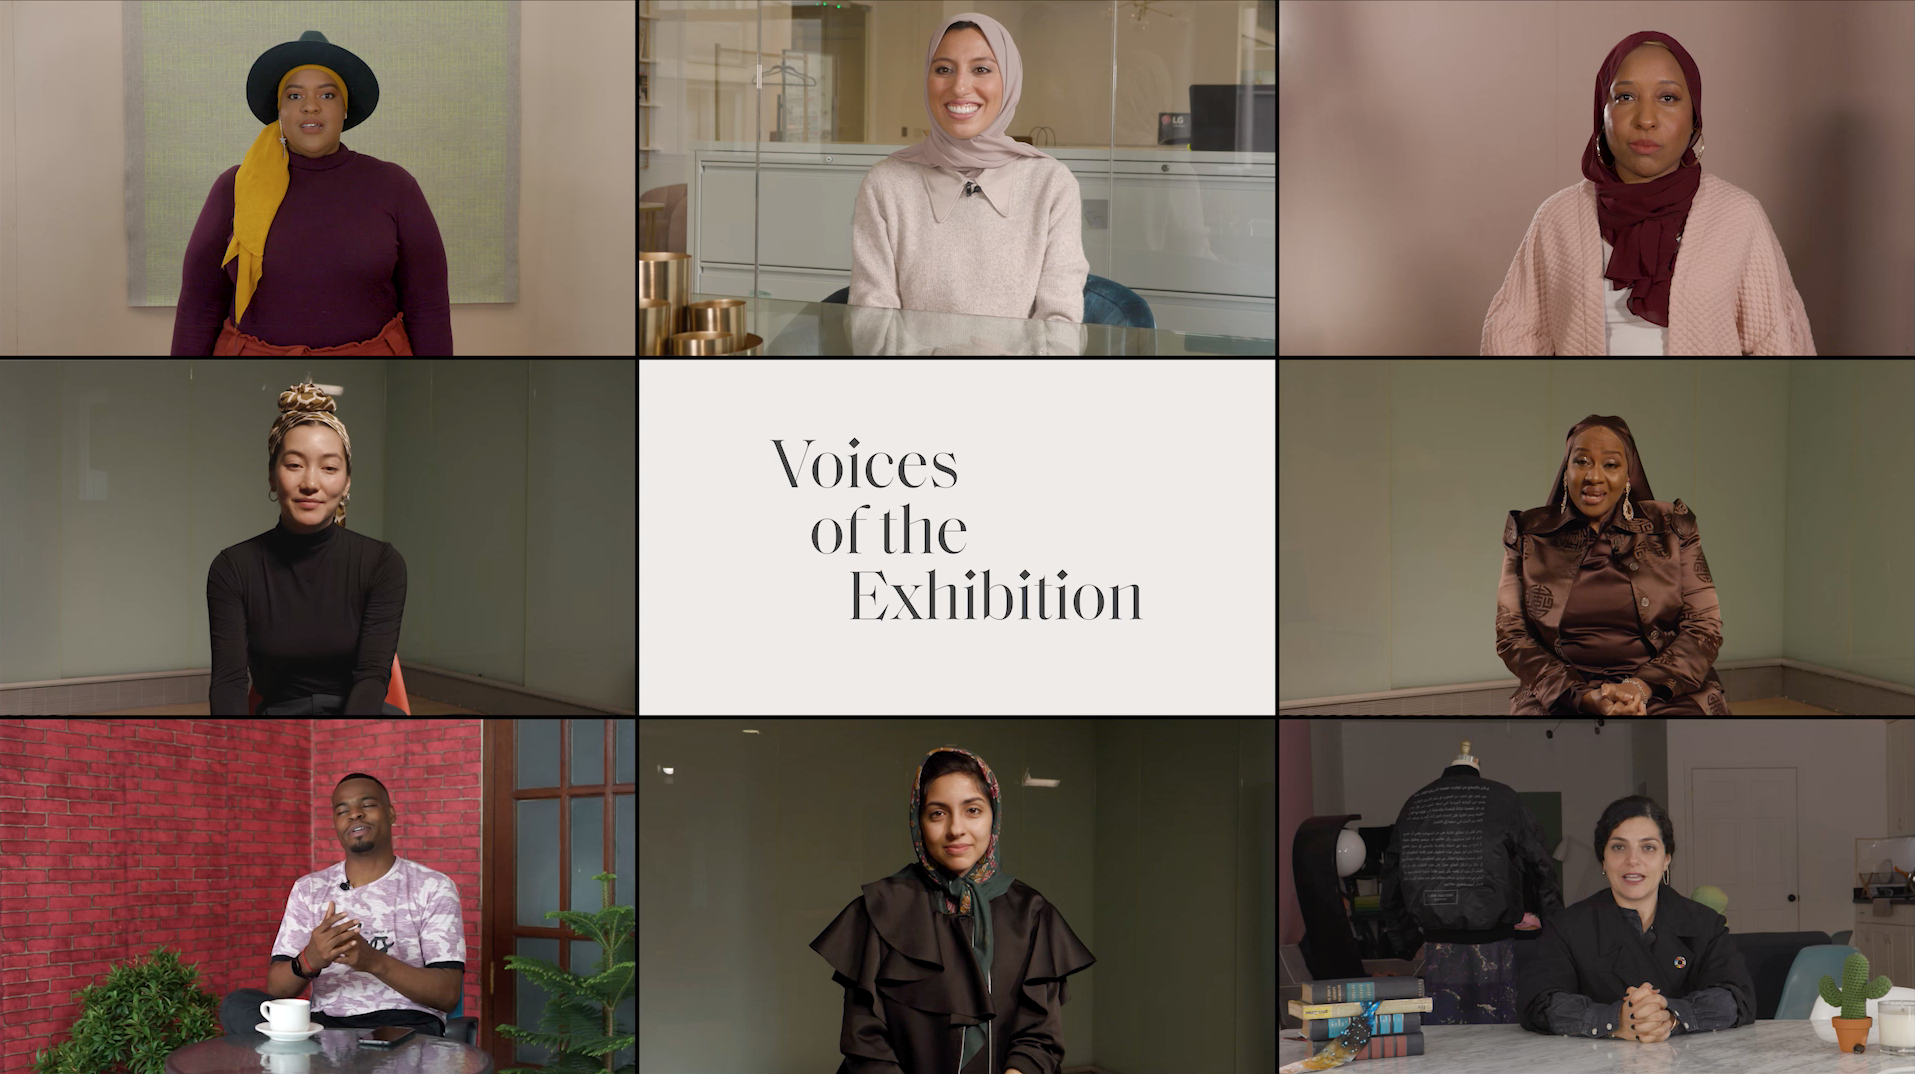 IMAGE: in a 3x3 grid, 7 women and one man smile at the camera. IN the middle grid the words "Voices of the Exhibition" fade on